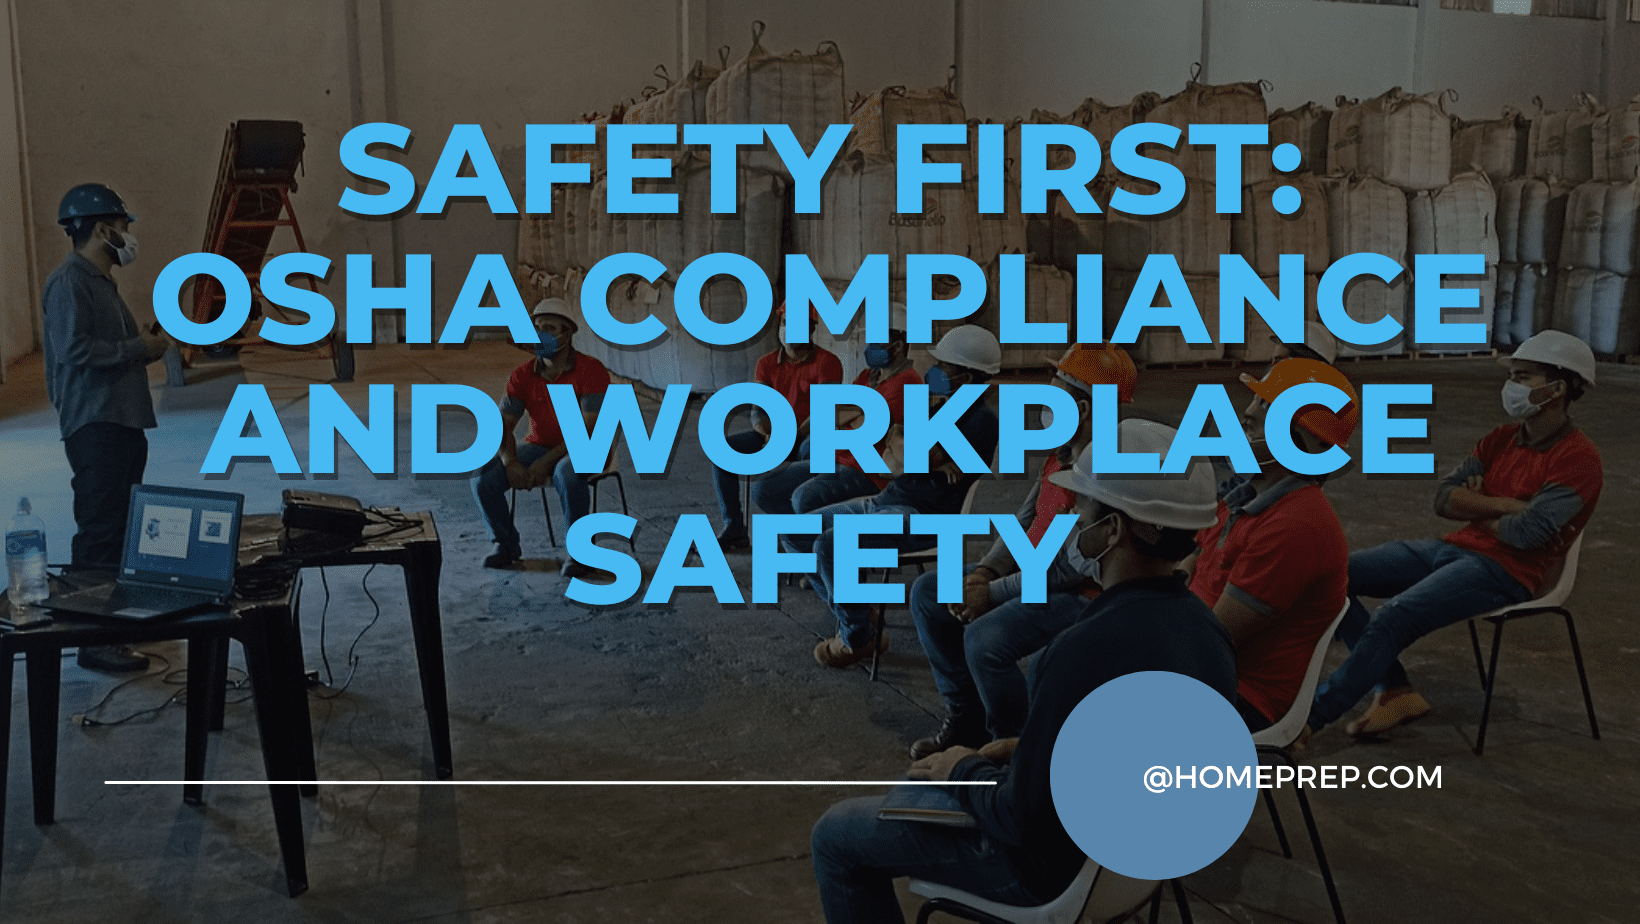 Safety First: OSHA Compliance and Workplace Safety